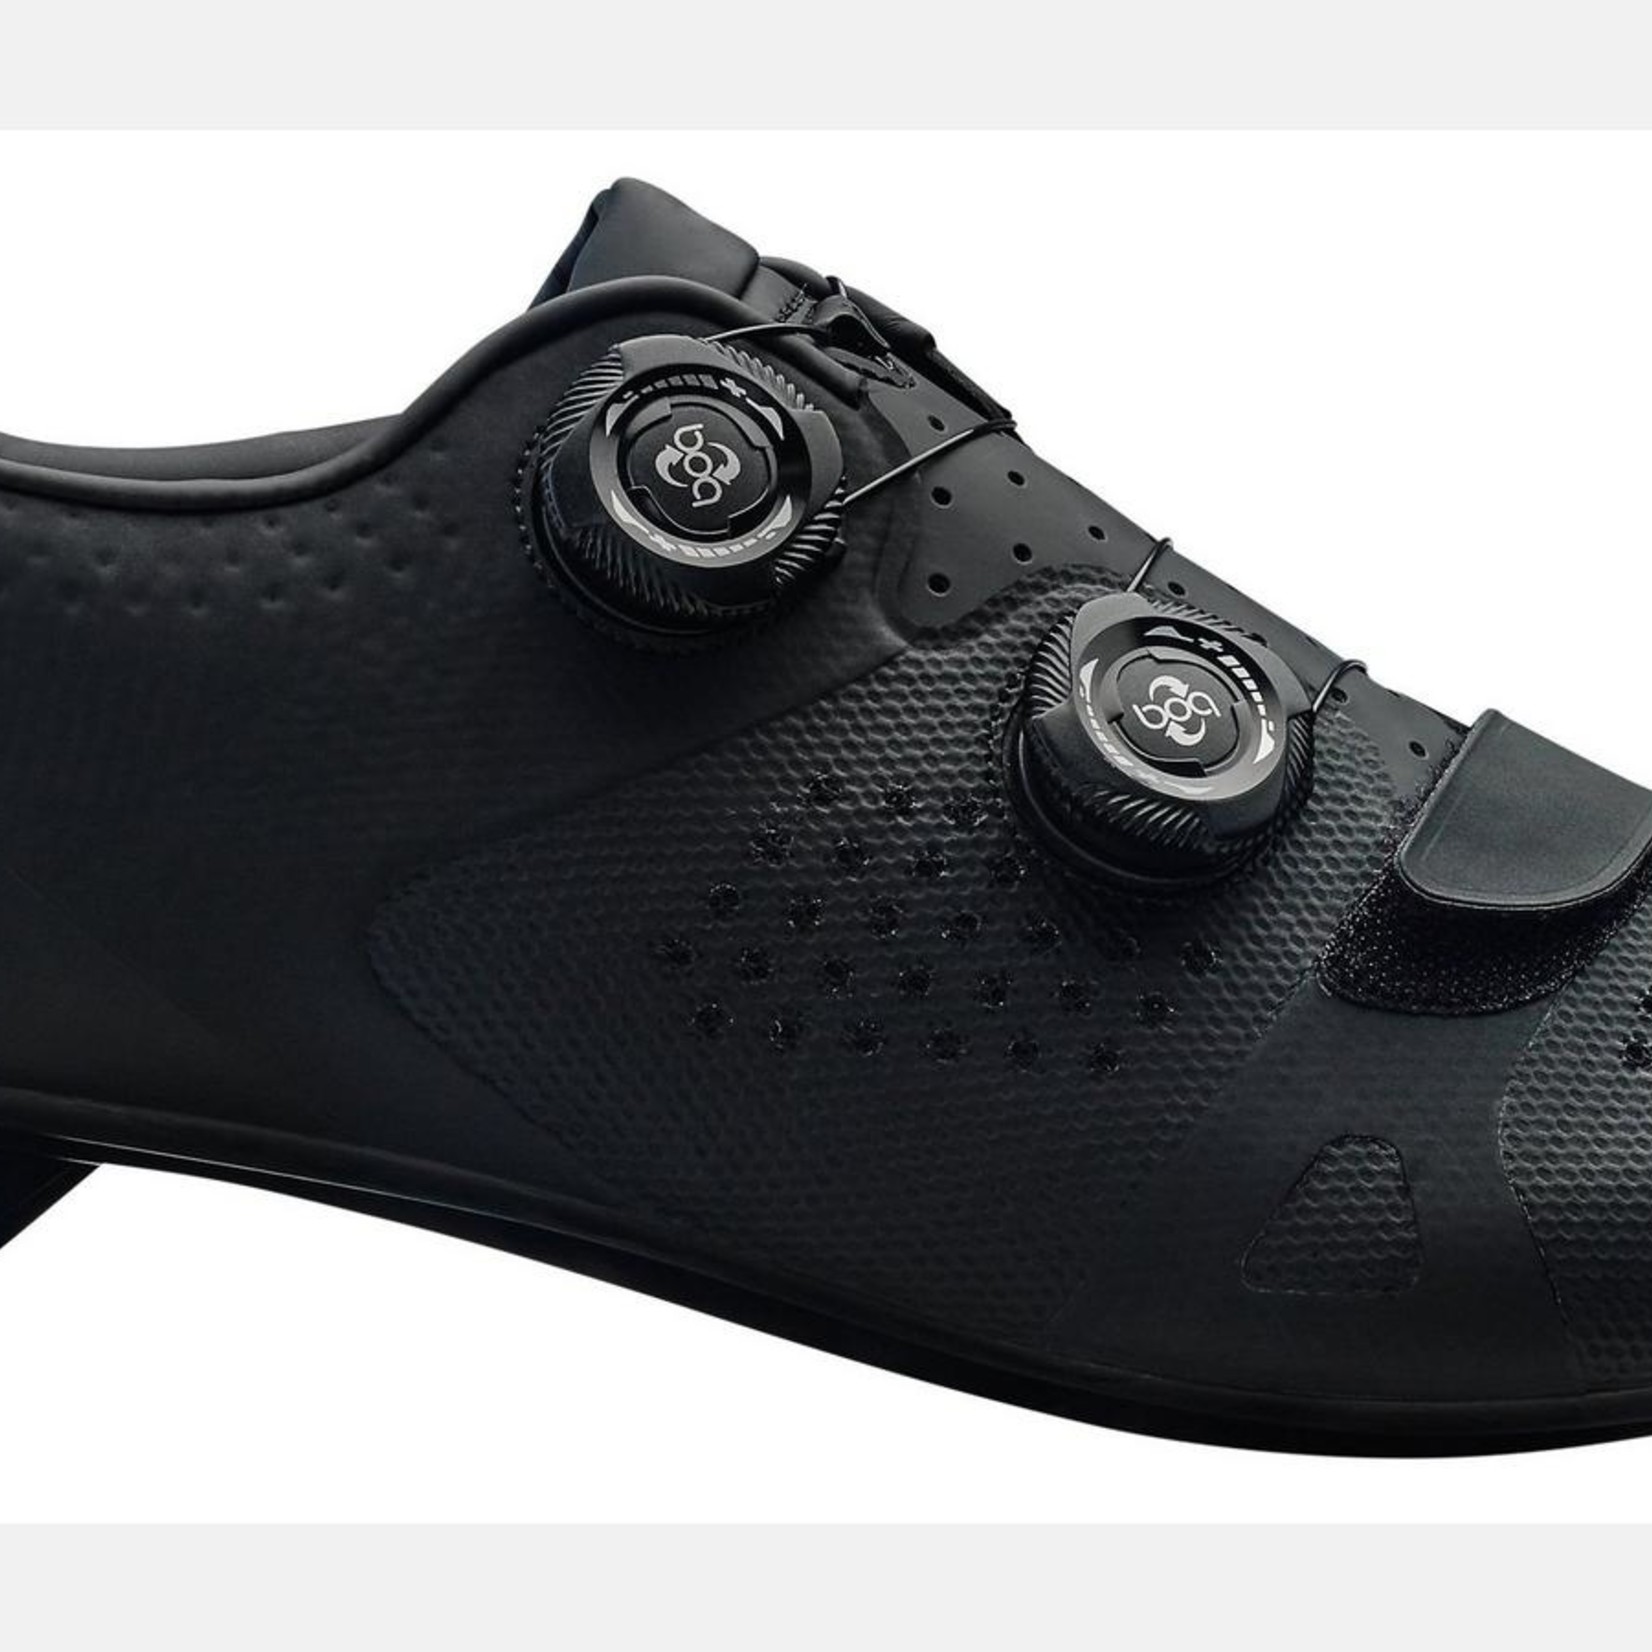 Specialized TORCH 3.0 RD SHOE BLK 41.5